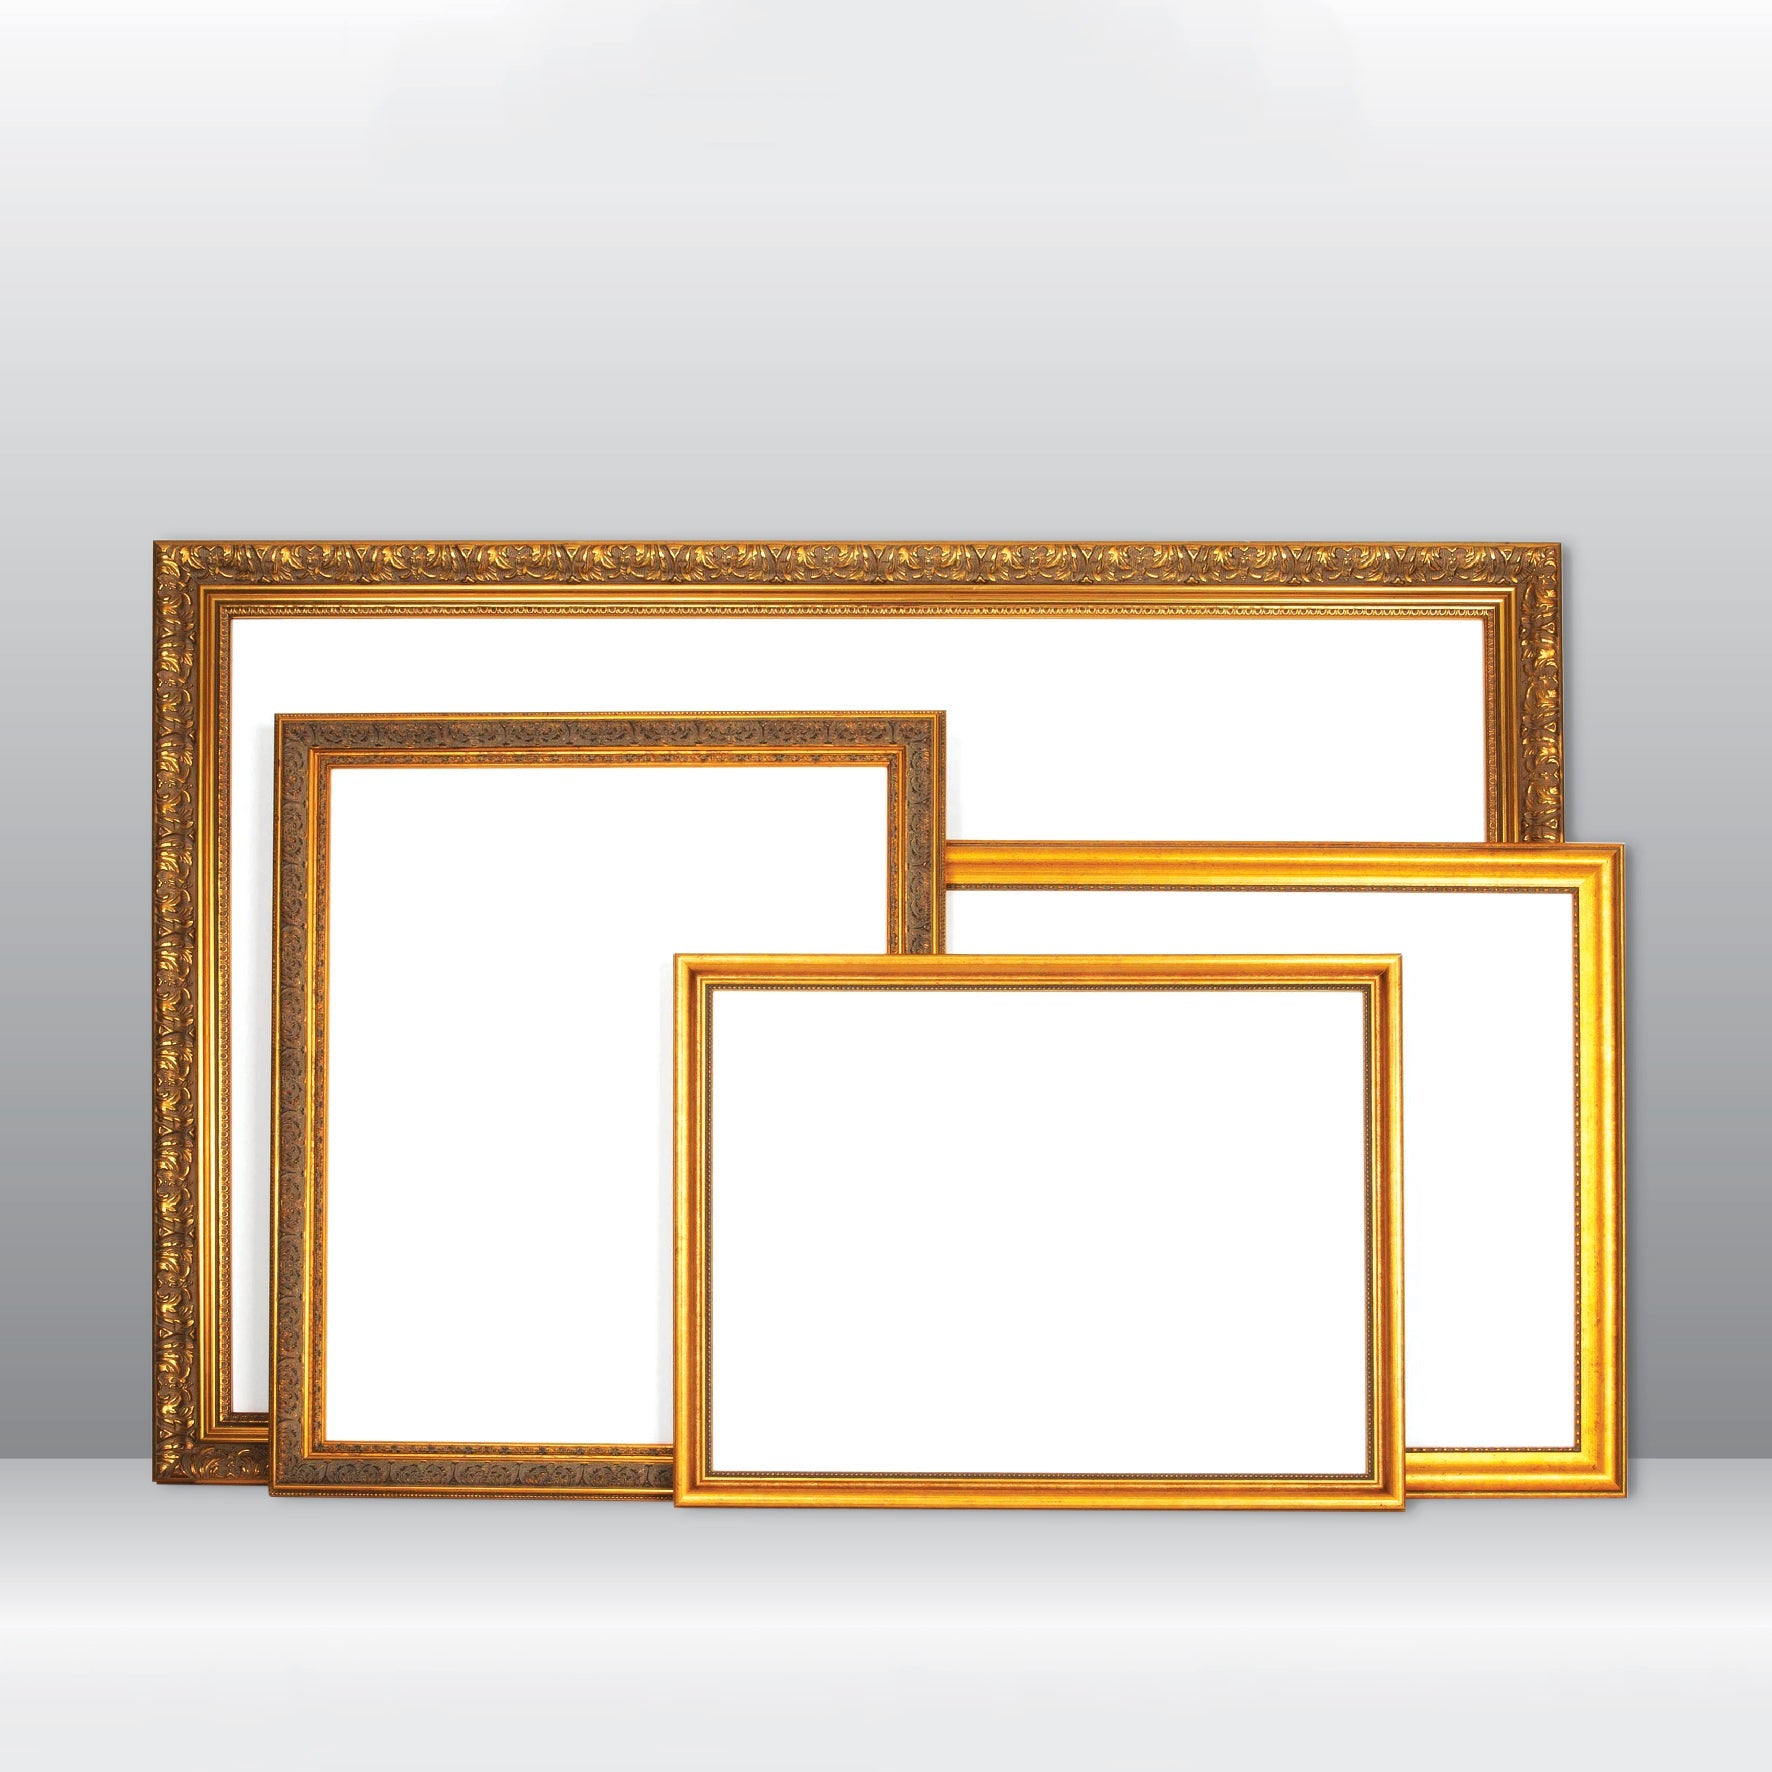 Wooden Ornate Gold, Classic Gold Photo Picture Frame for Wall Art Work 8x10", 8x12", 10x13", 11x14", 12x16", 12x18"